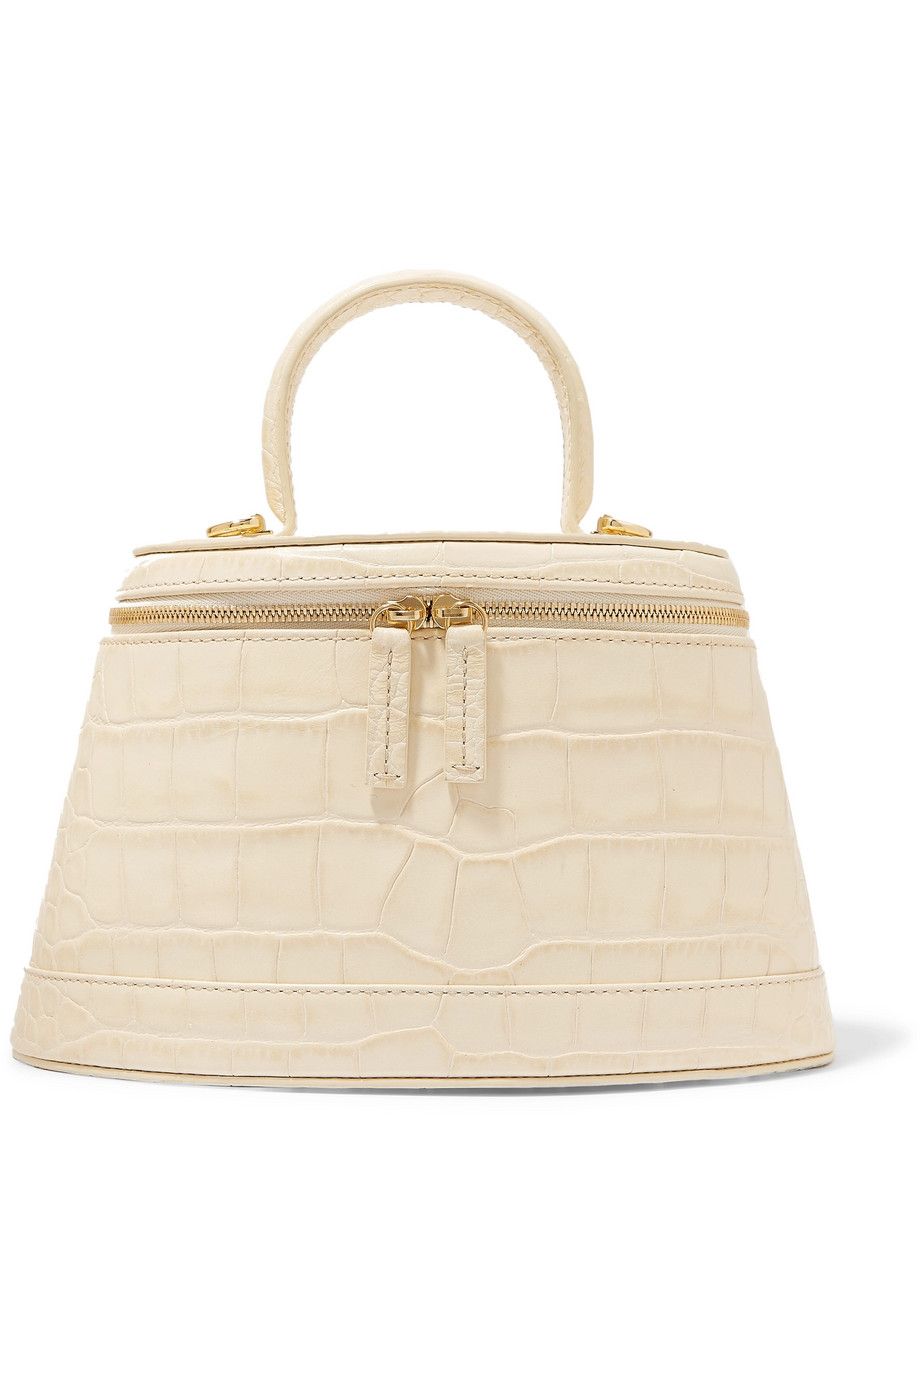 Super Trendy By Far Bags Are Up to 50% Off, And They're Selling